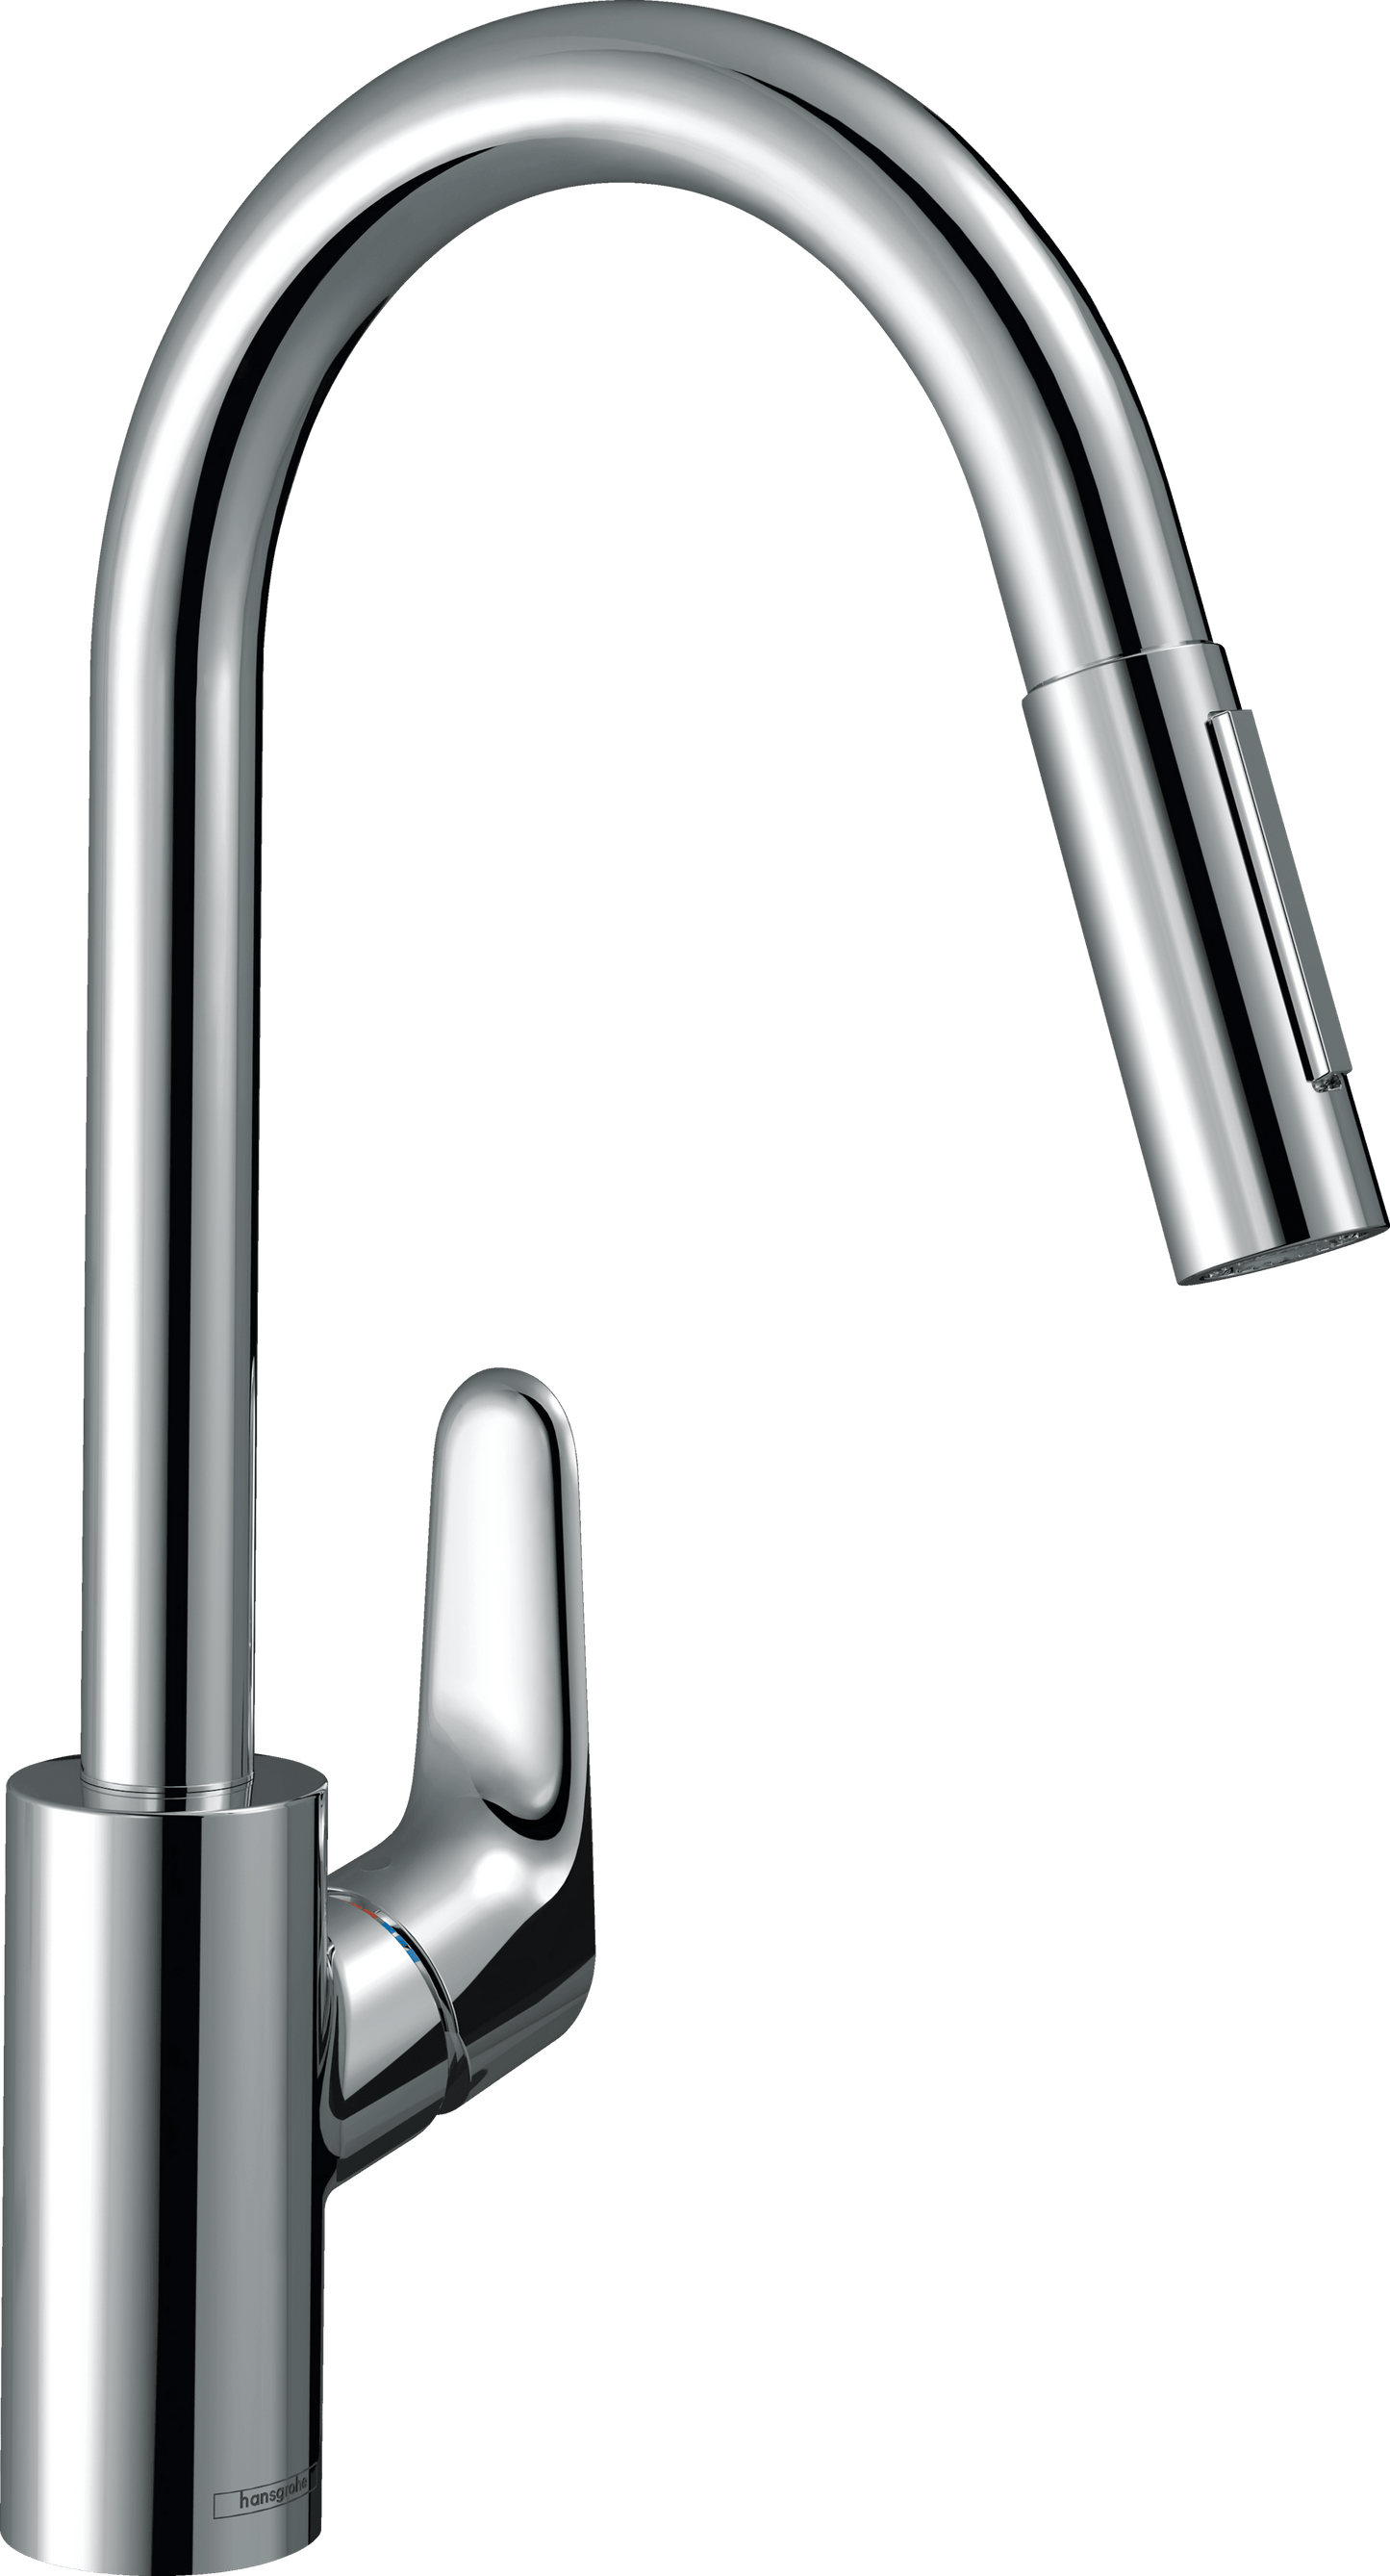 hansgrohe pull out spray kitchen sink mixer